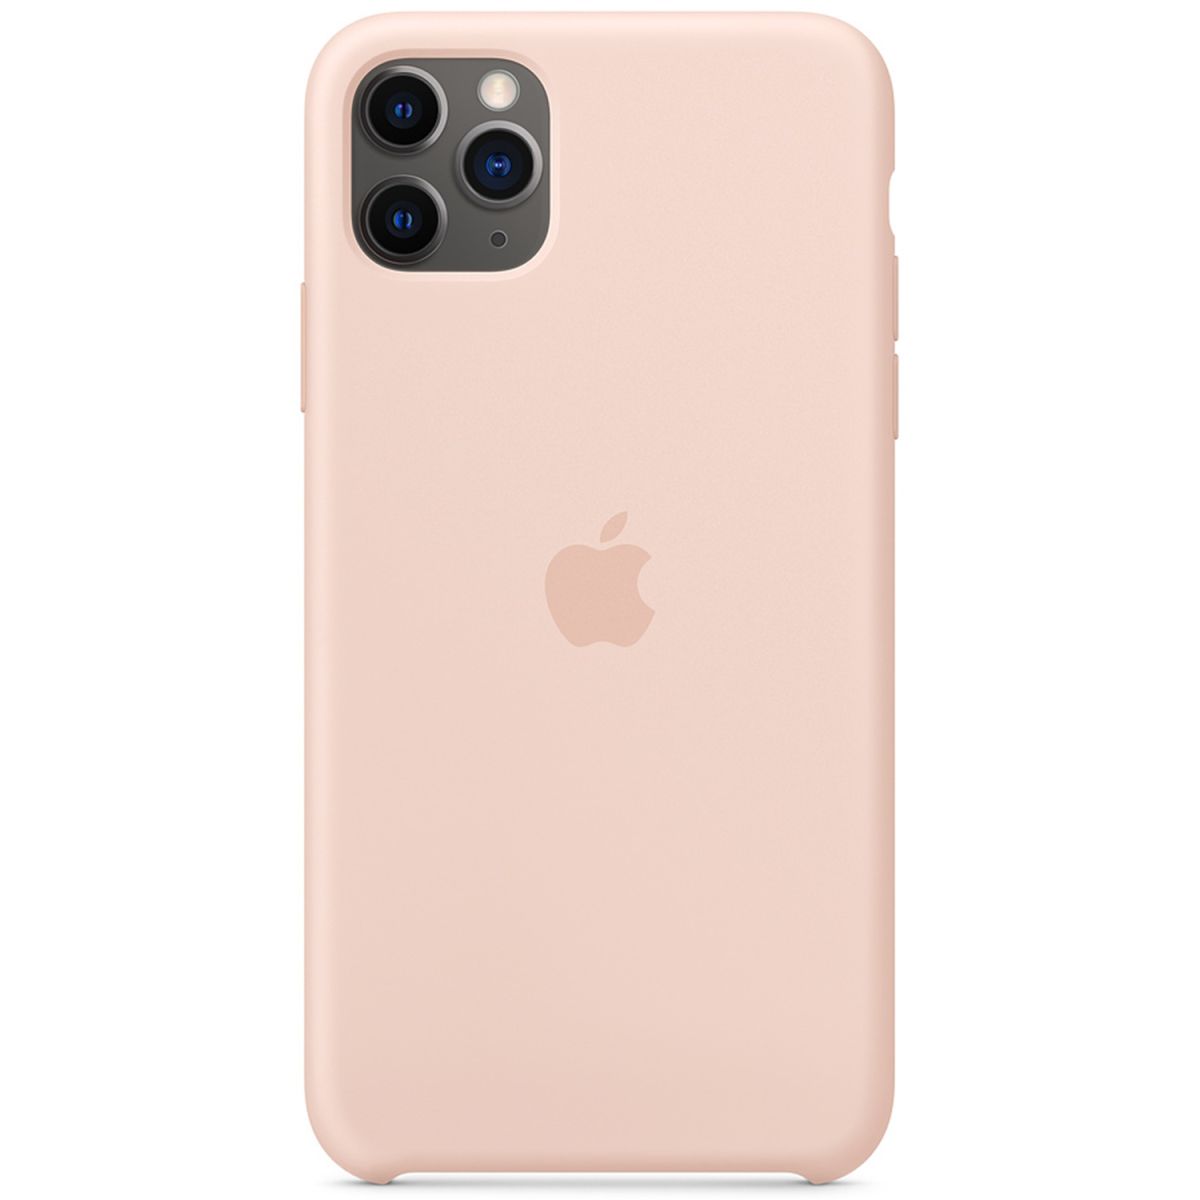 Apple Silicone Backcover for iPhone 11 Pro Max - Pink Sand